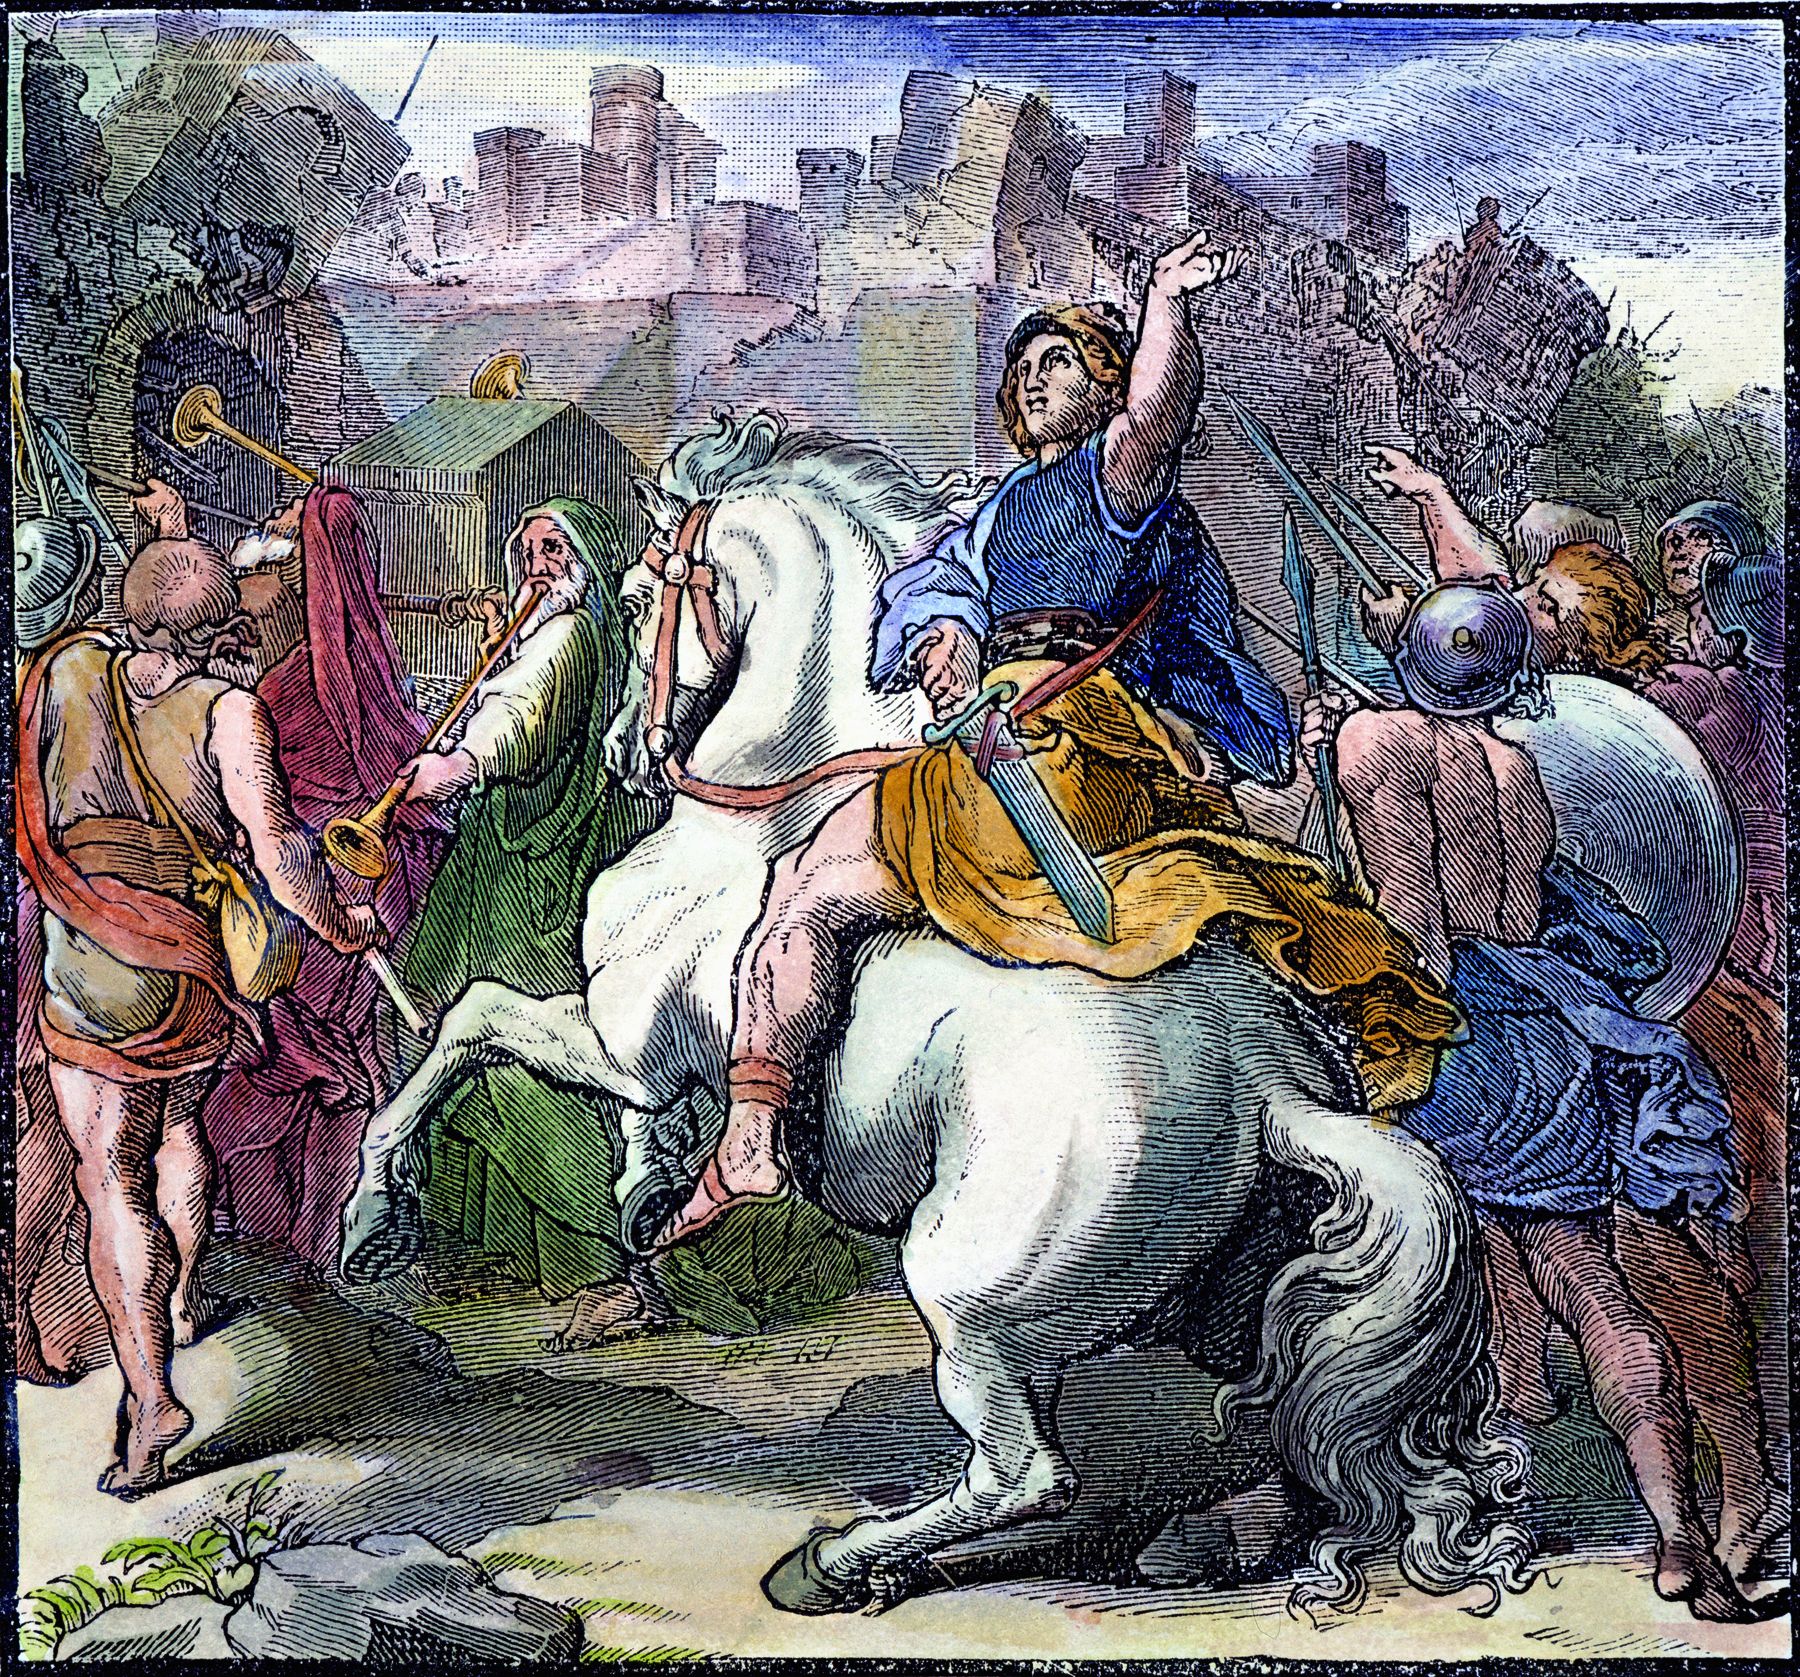  A mounted Joshua, drawing his sword, leads the Israelite forces besieging Jericho in this 19th-century engraving.